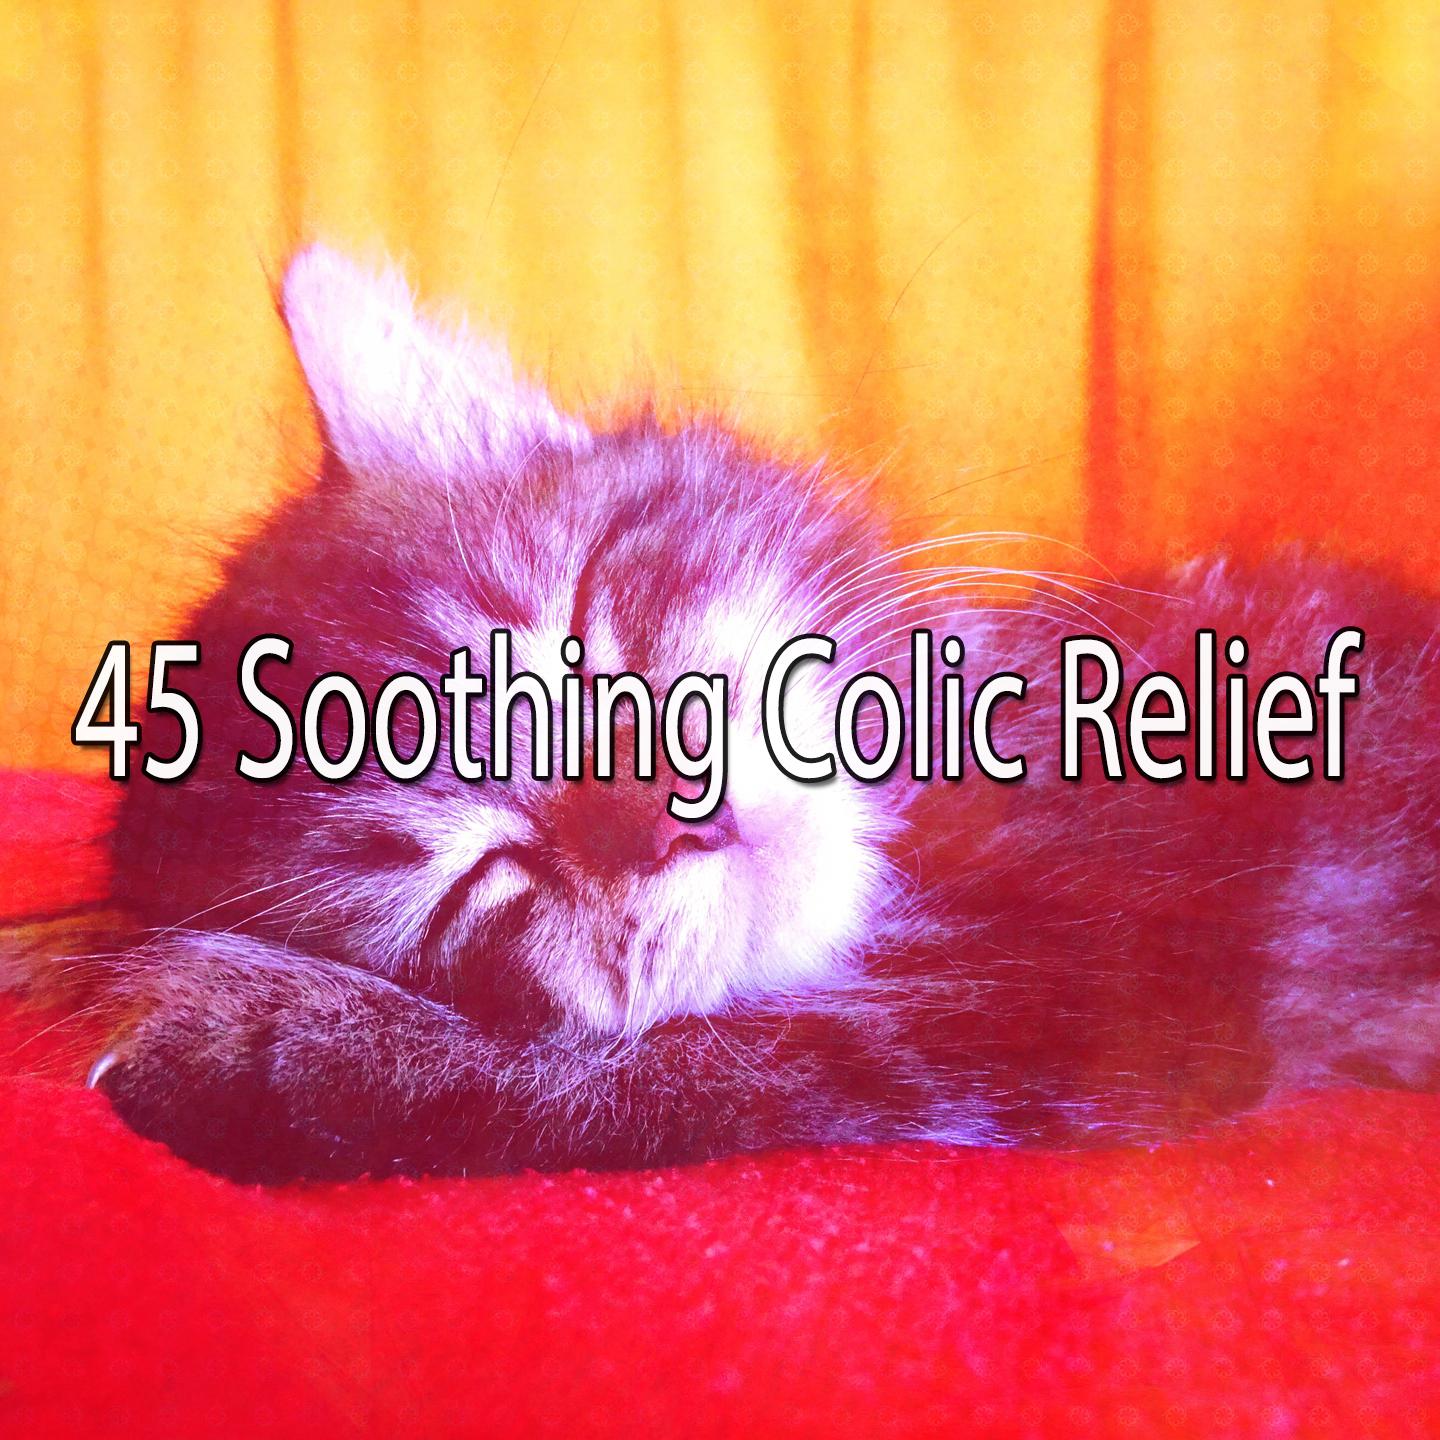 45 Soothing Colic Relief